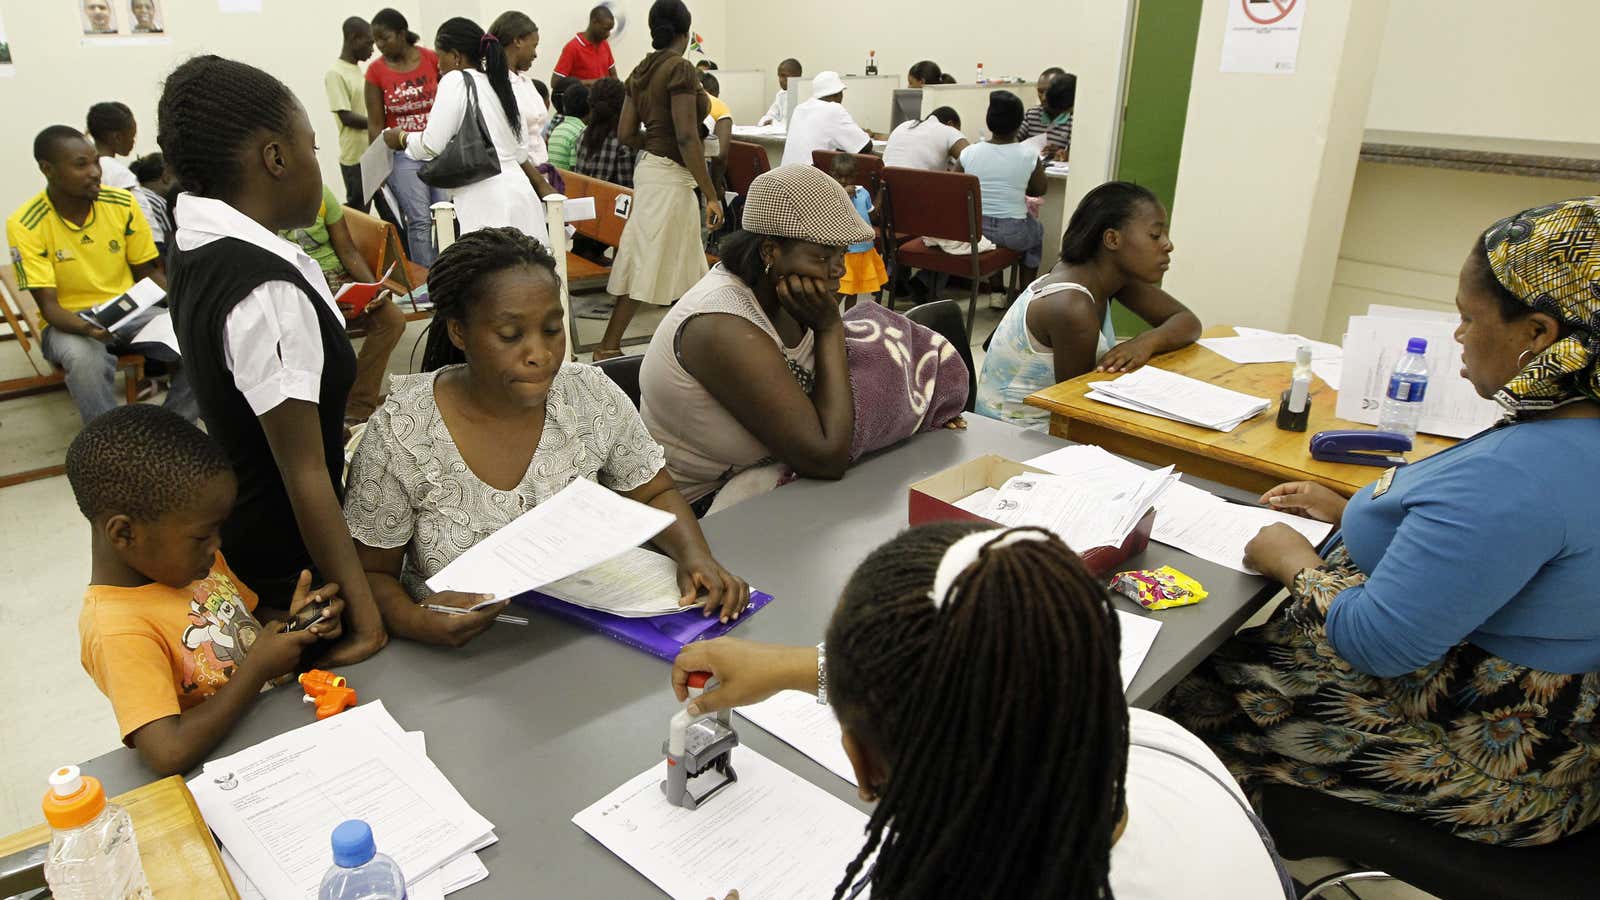 Zimbabweans being processed for residence permits in South Africa.